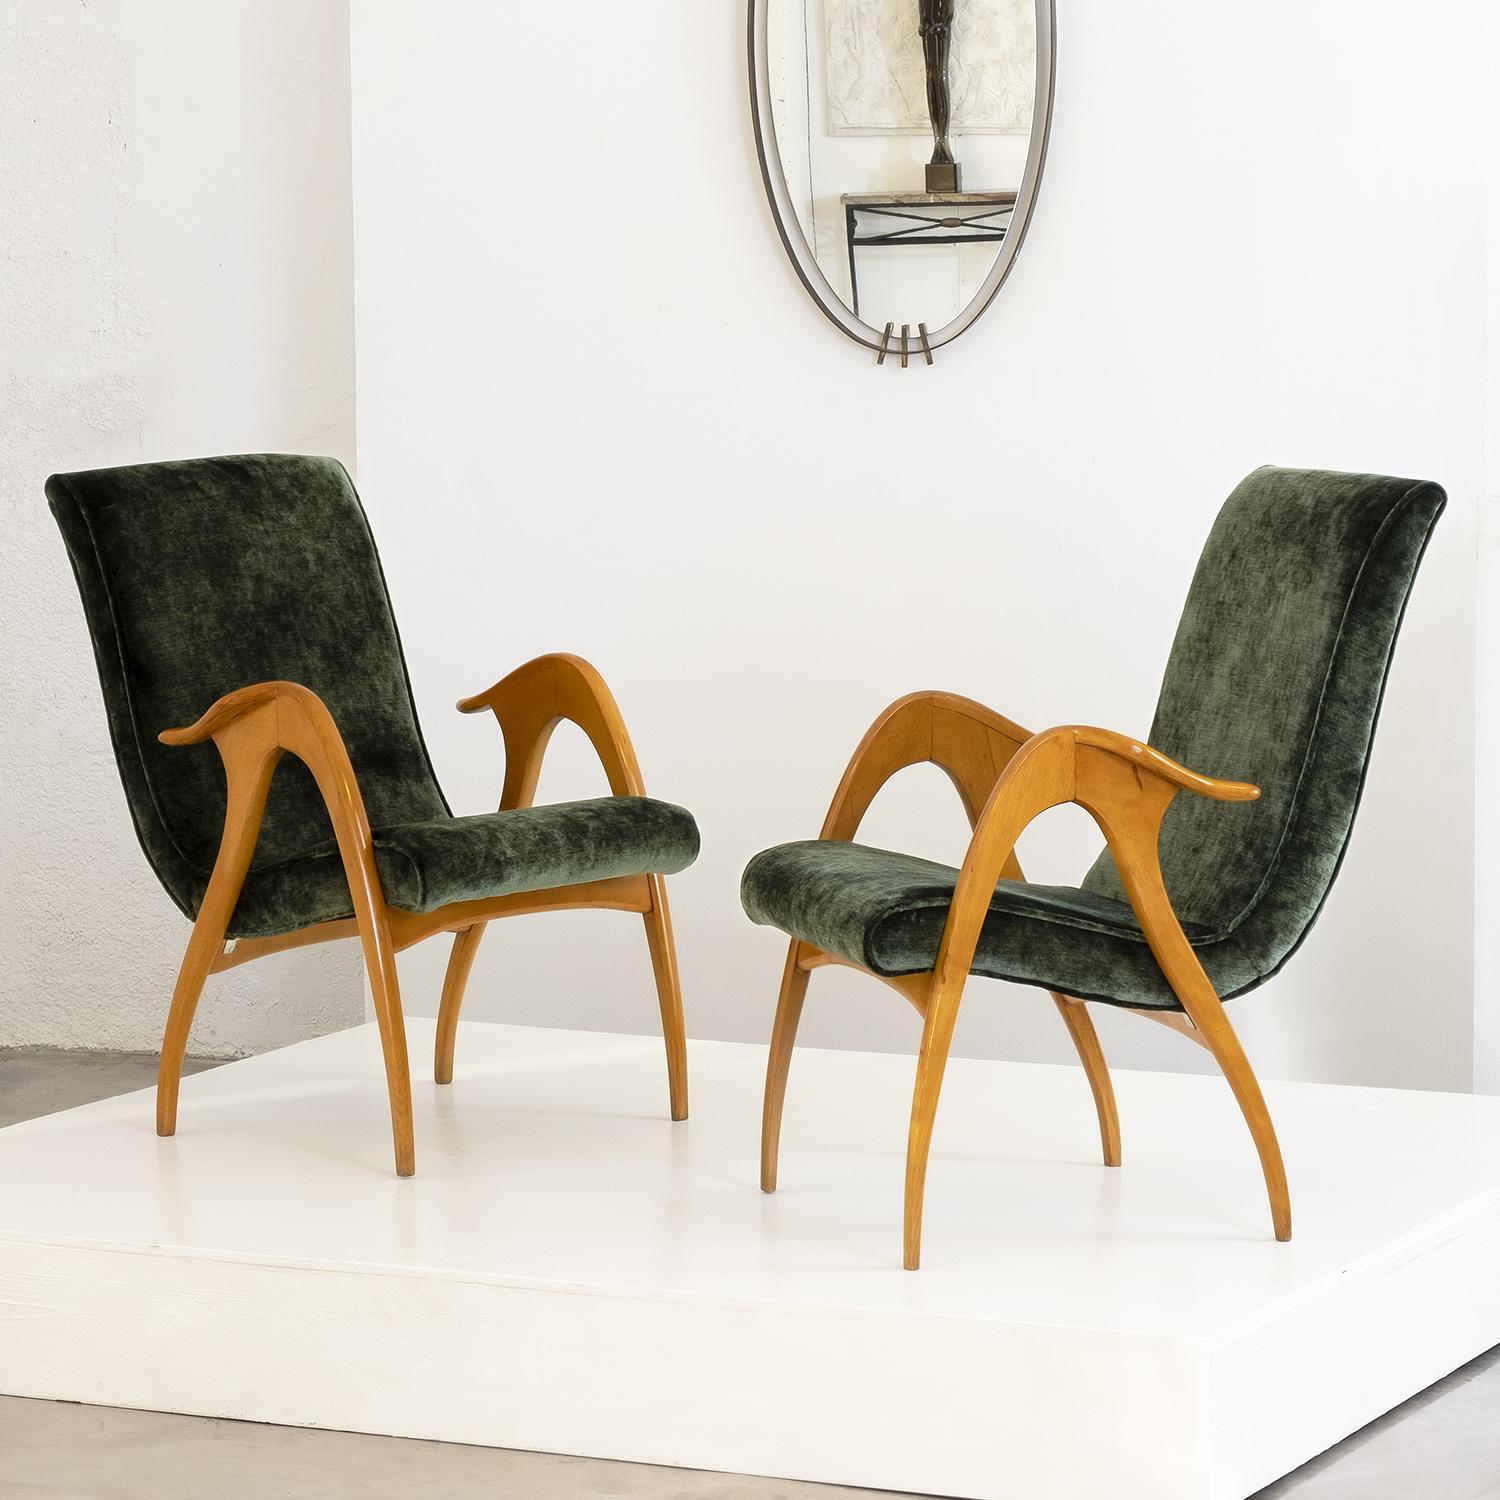 A vintage Mid-Century Modern Italian pair of lounge chairs made of handcrafted polished Beechwood, designed and produced by Malatesta & Masson in good condition. The seat back rest of the sculptural armchairs are curved with slim, arched armrests,